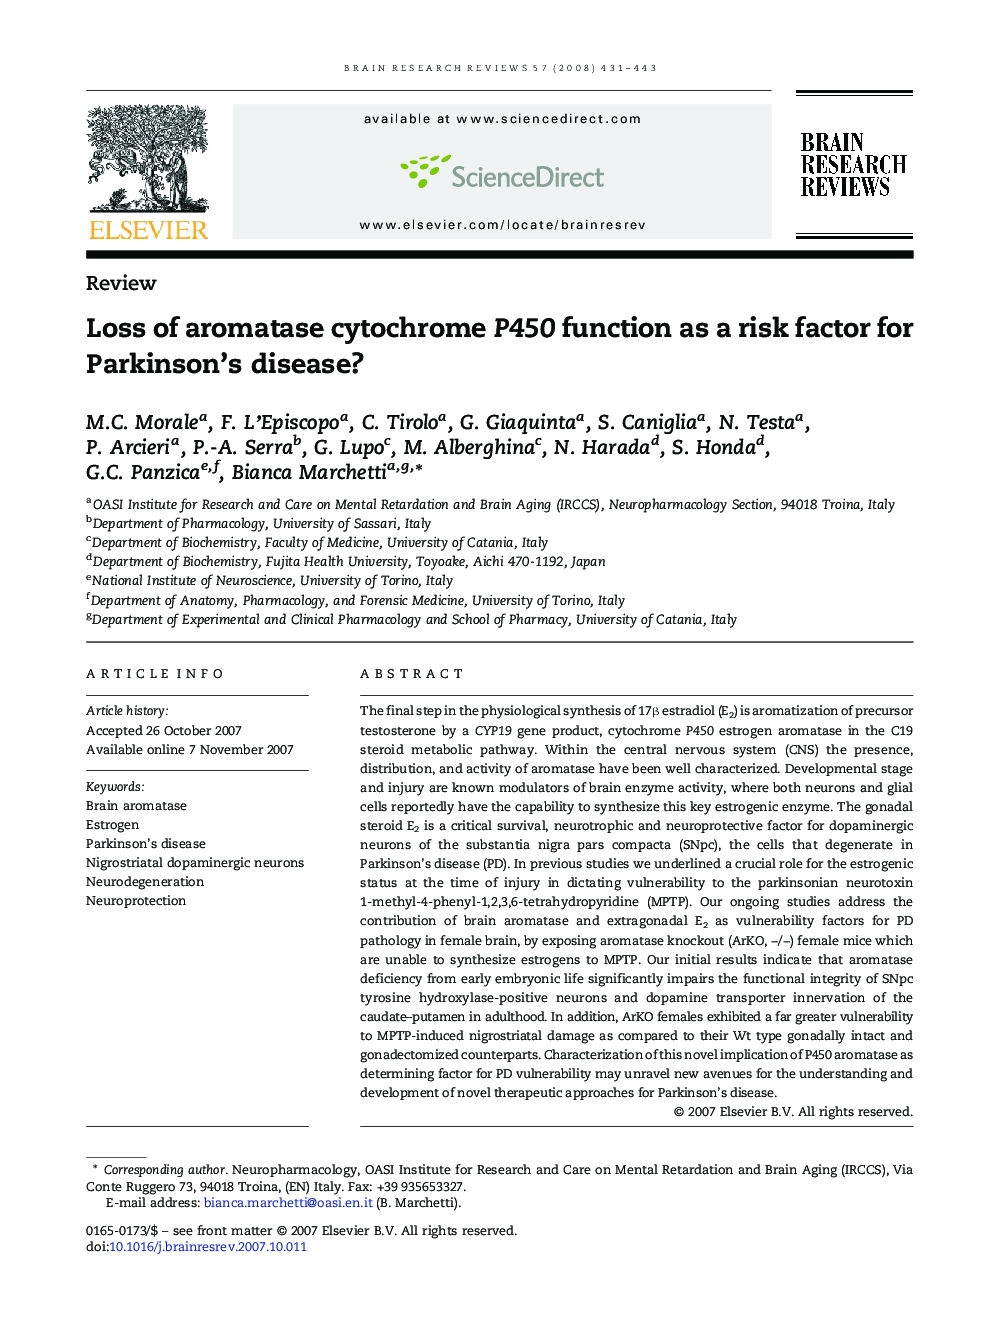 Loss of aromatase cytochrome P450 function as a risk factor for Parkinson's disease?